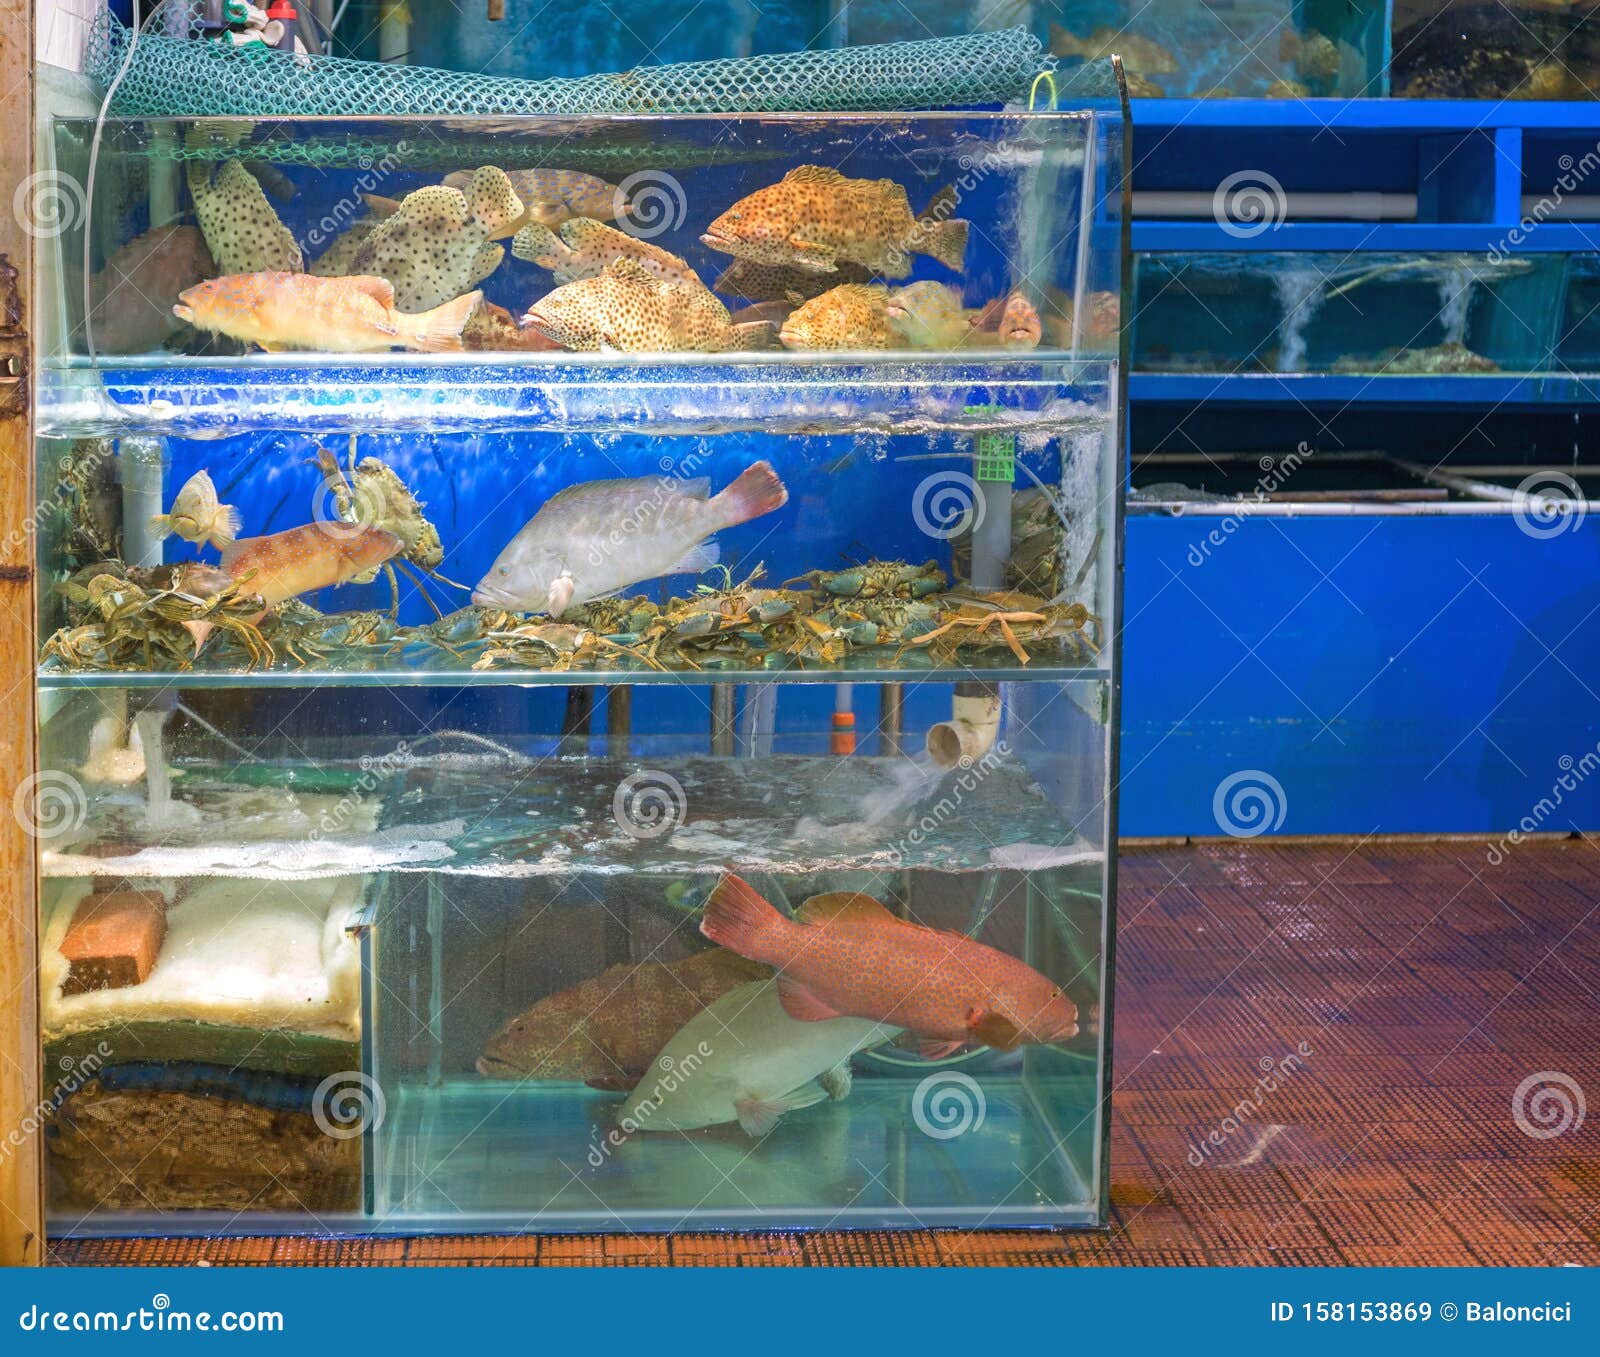 online live fish shopping